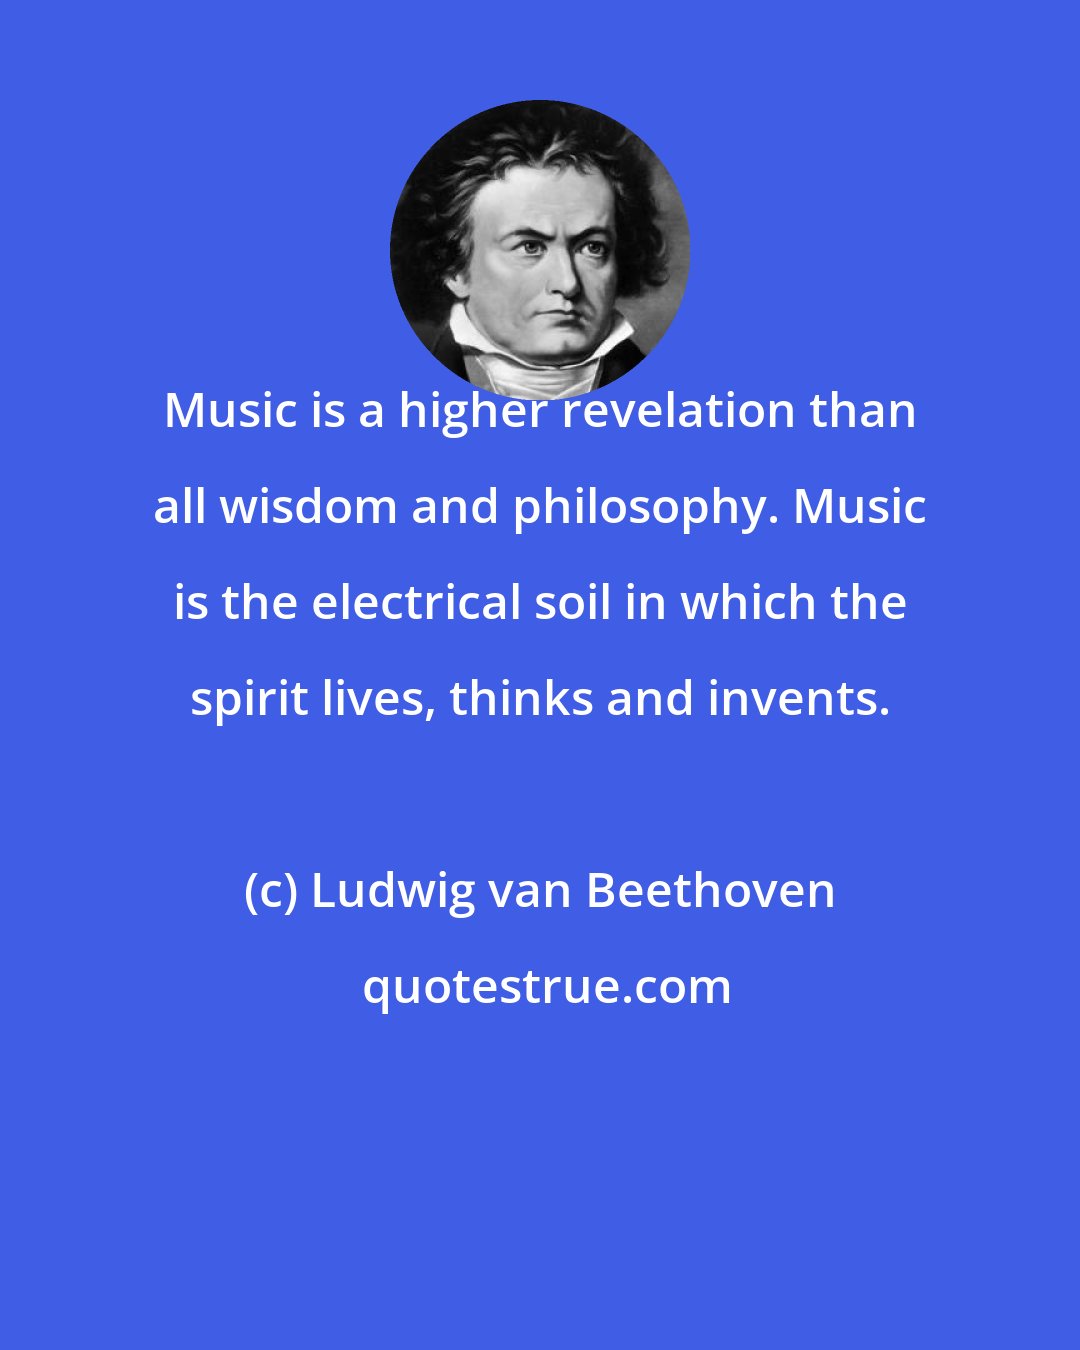 Ludwig van Beethoven: Music is a higher revelation than all wisdom and philosophy. Music is the electrical soil in which the spirit lives, thinks and invents.